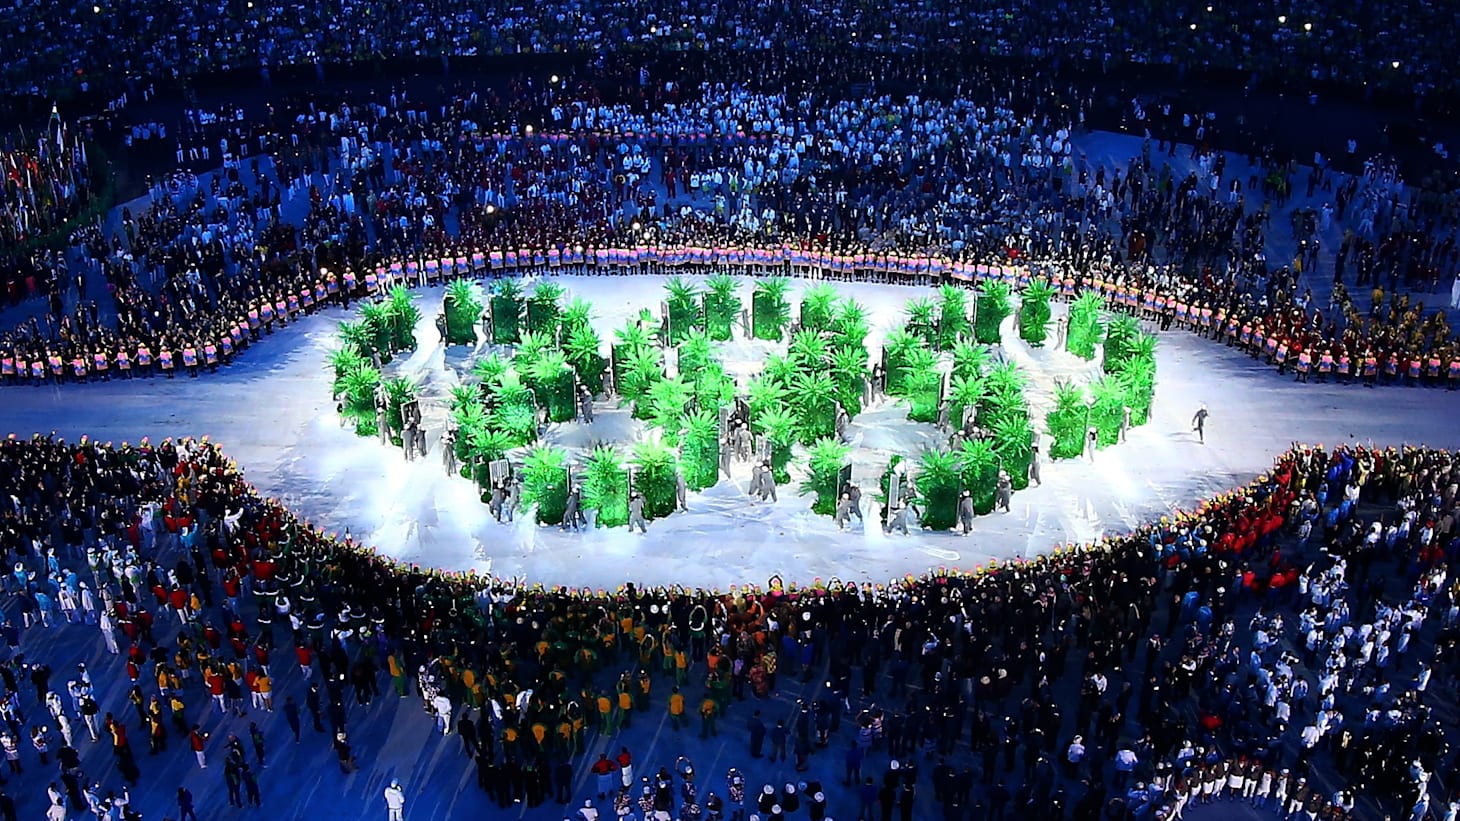 Winter Olympics 2018 Opening Ceremony: Highlights and Analysis